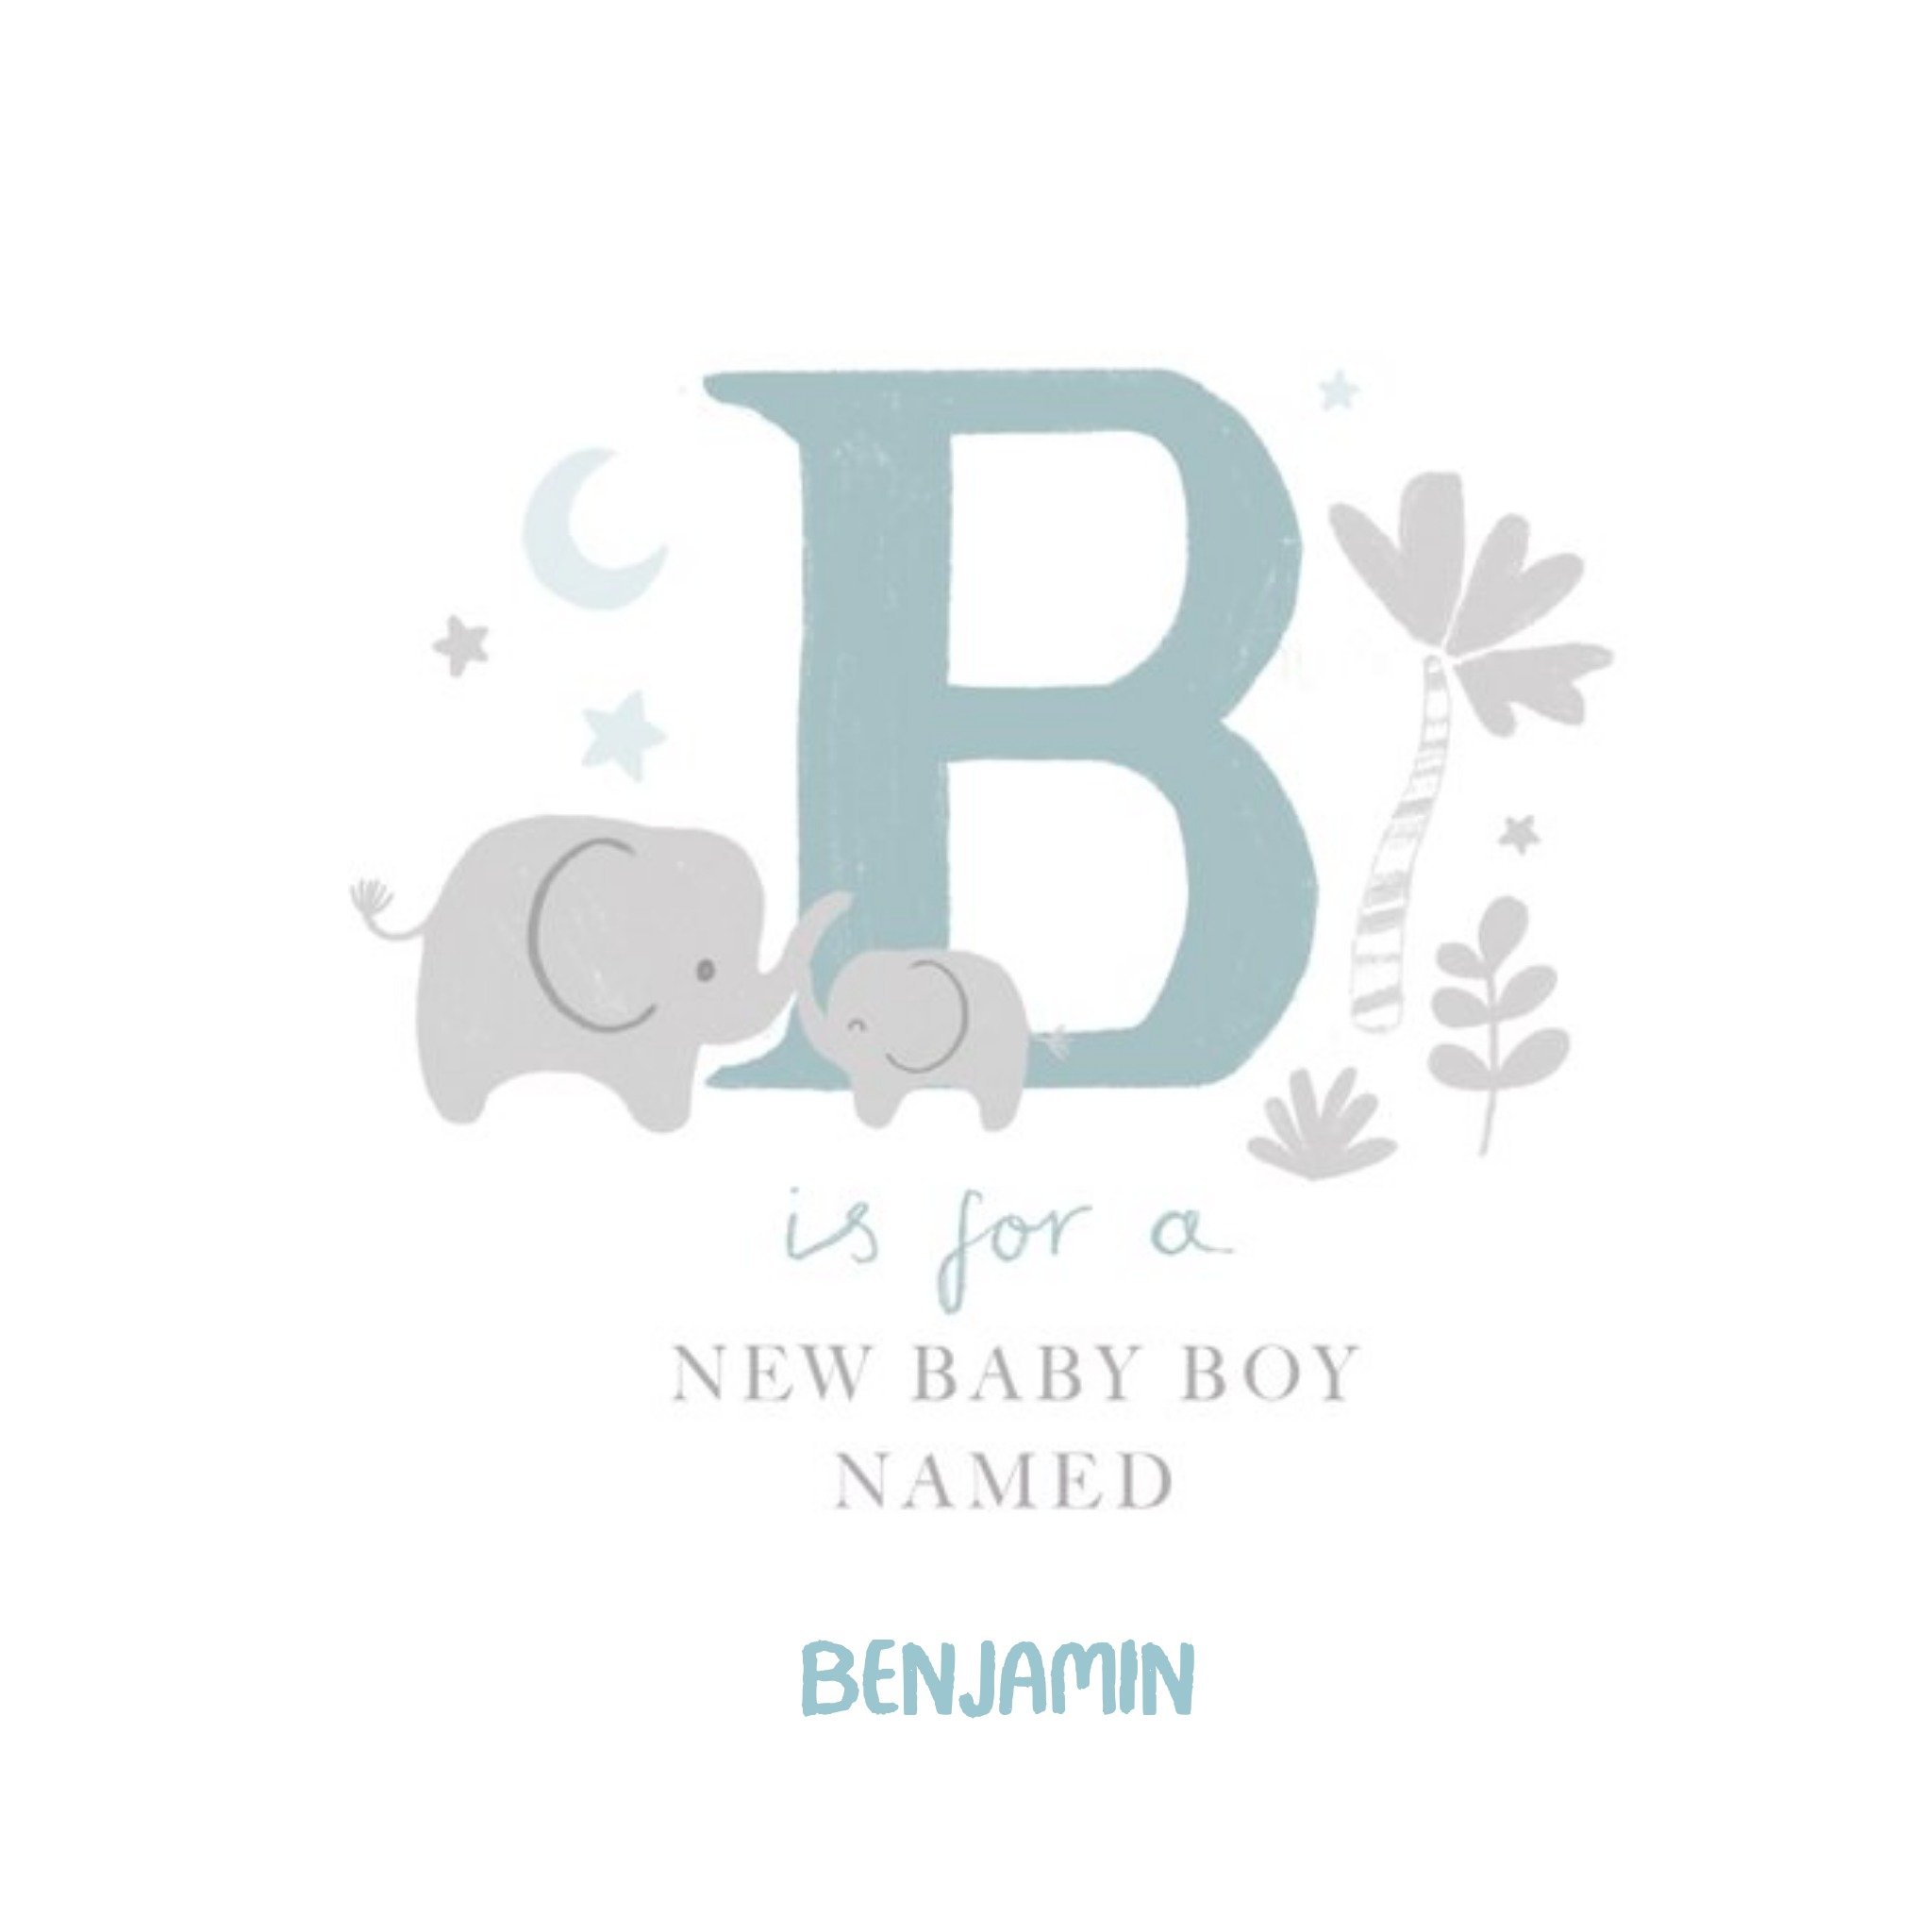 Moonpig Millicent Venton Illustrated New Baby Boy Card, Square